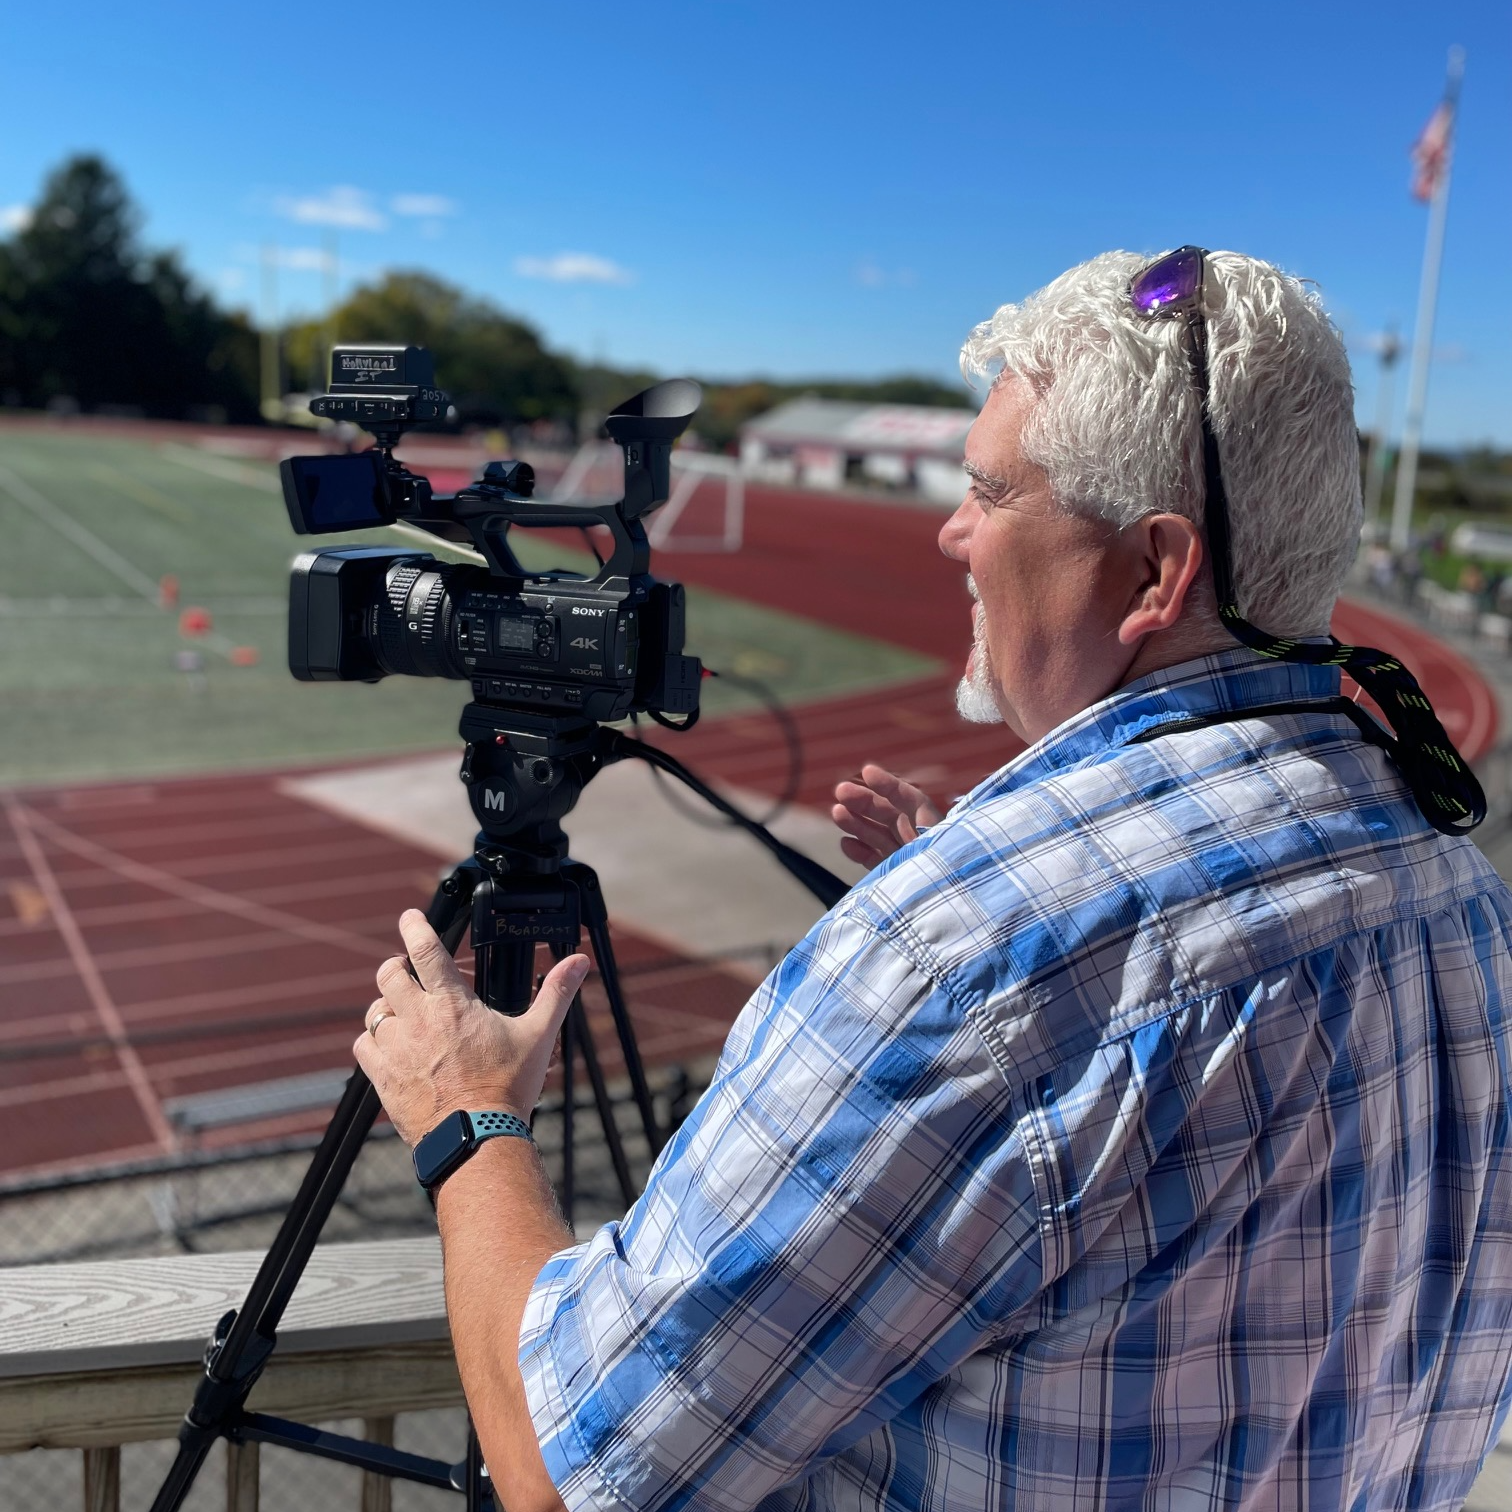 Steven Costa works with students in producing sport videos for WPHS Live.